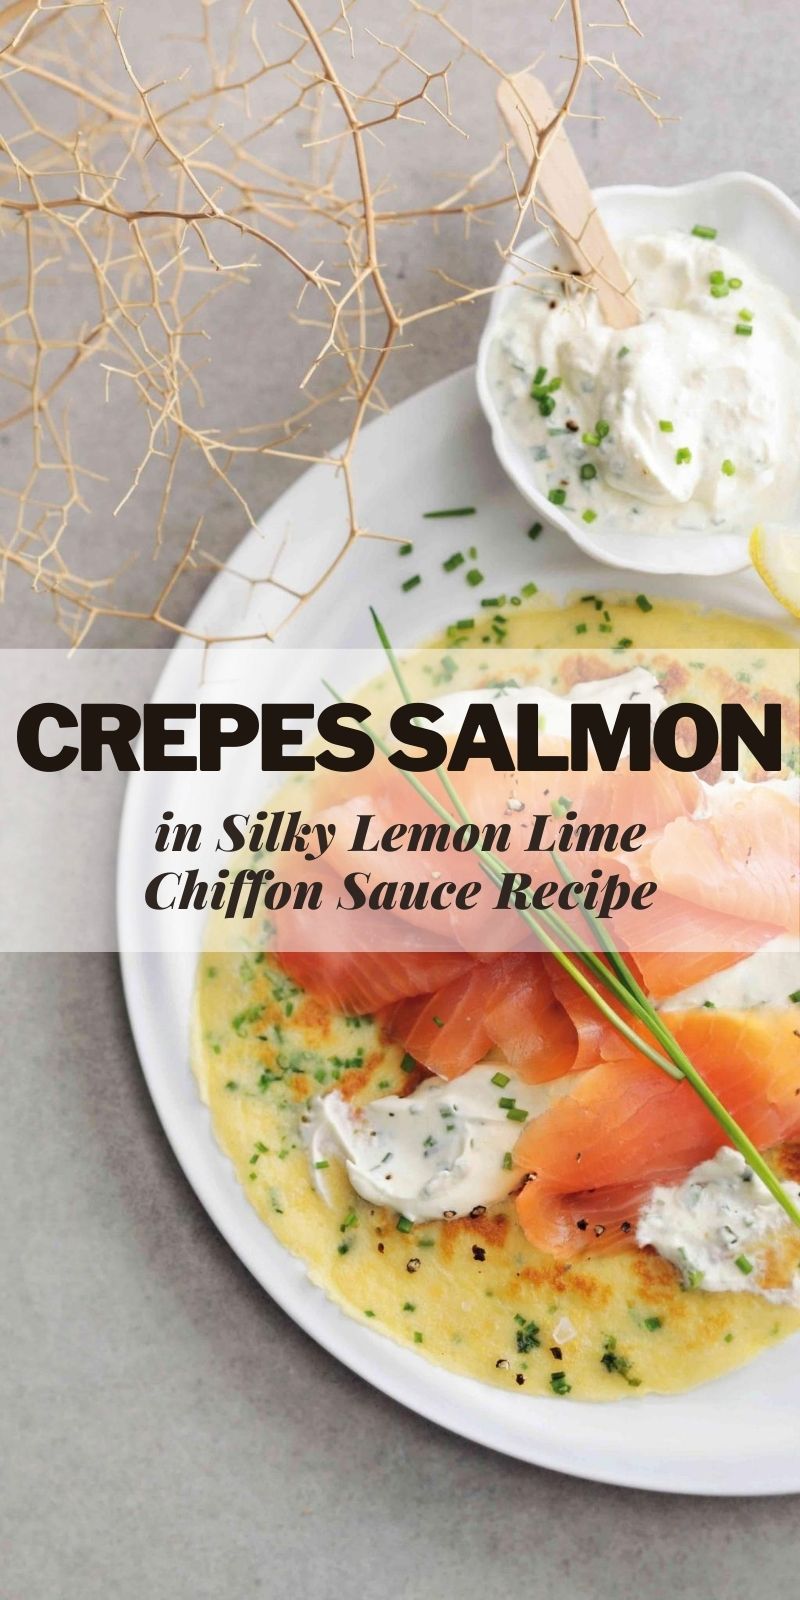 Crepes Salmon In Silky Lemon Lime Chiffon Sauce Recipe | Our Deer